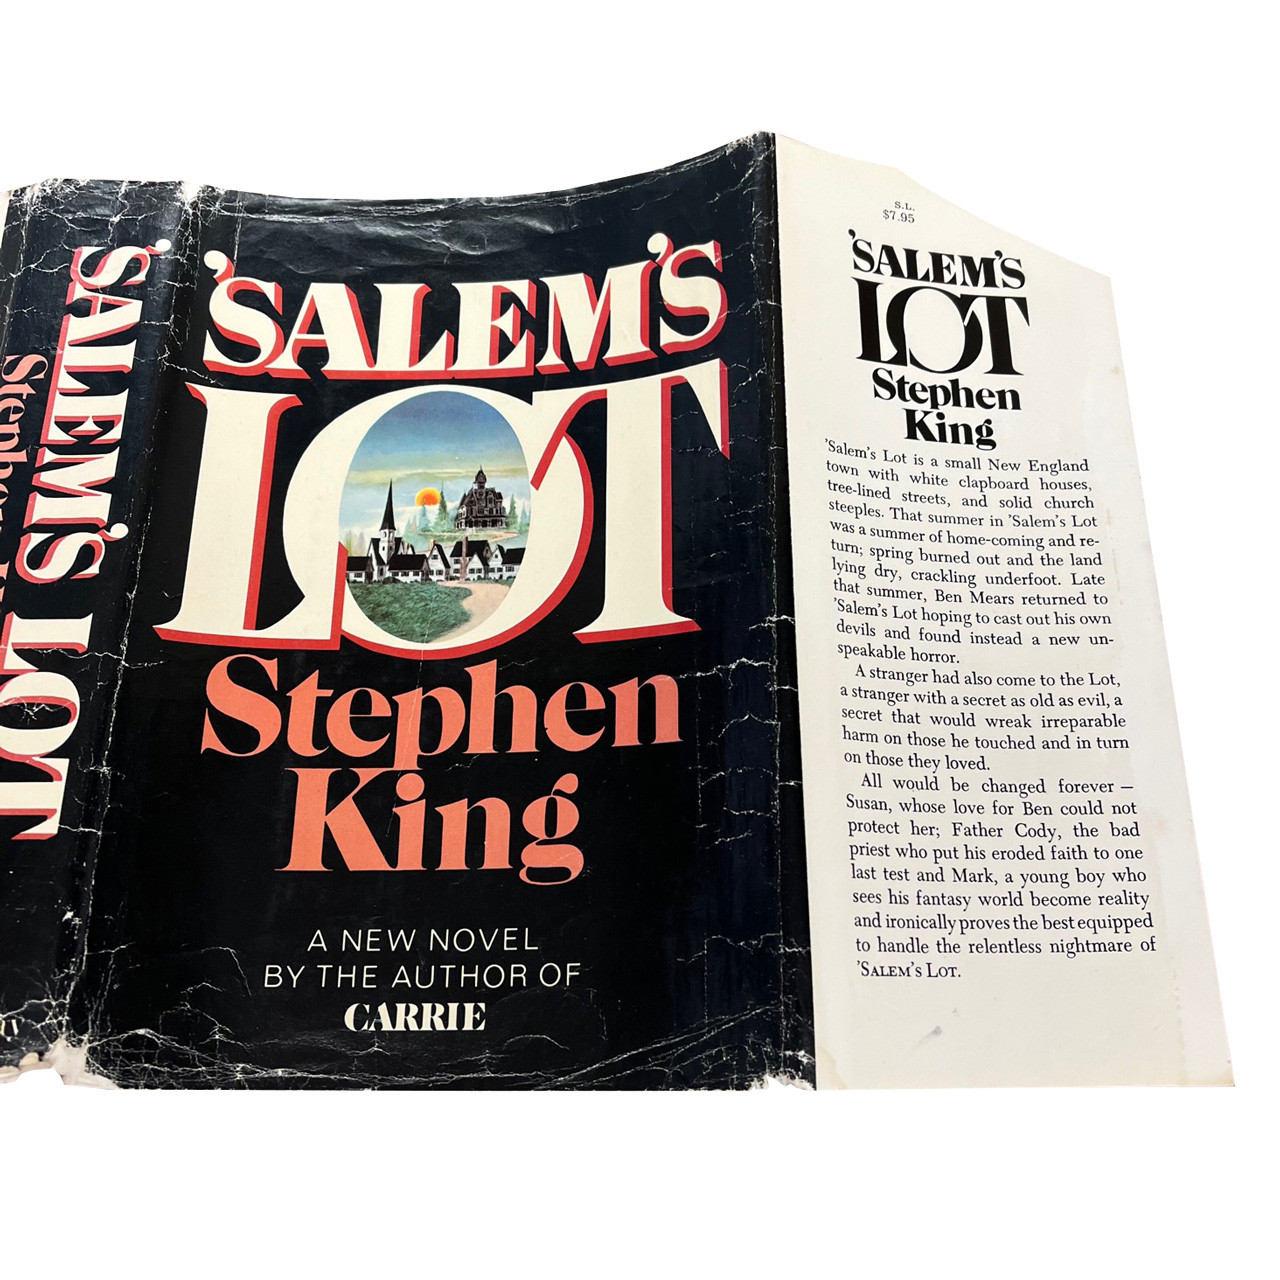 Stephen King "Salem's Lot" Slipcased First Edition, Second State DJ "Father Cody" Q37 Code [NF/Good]